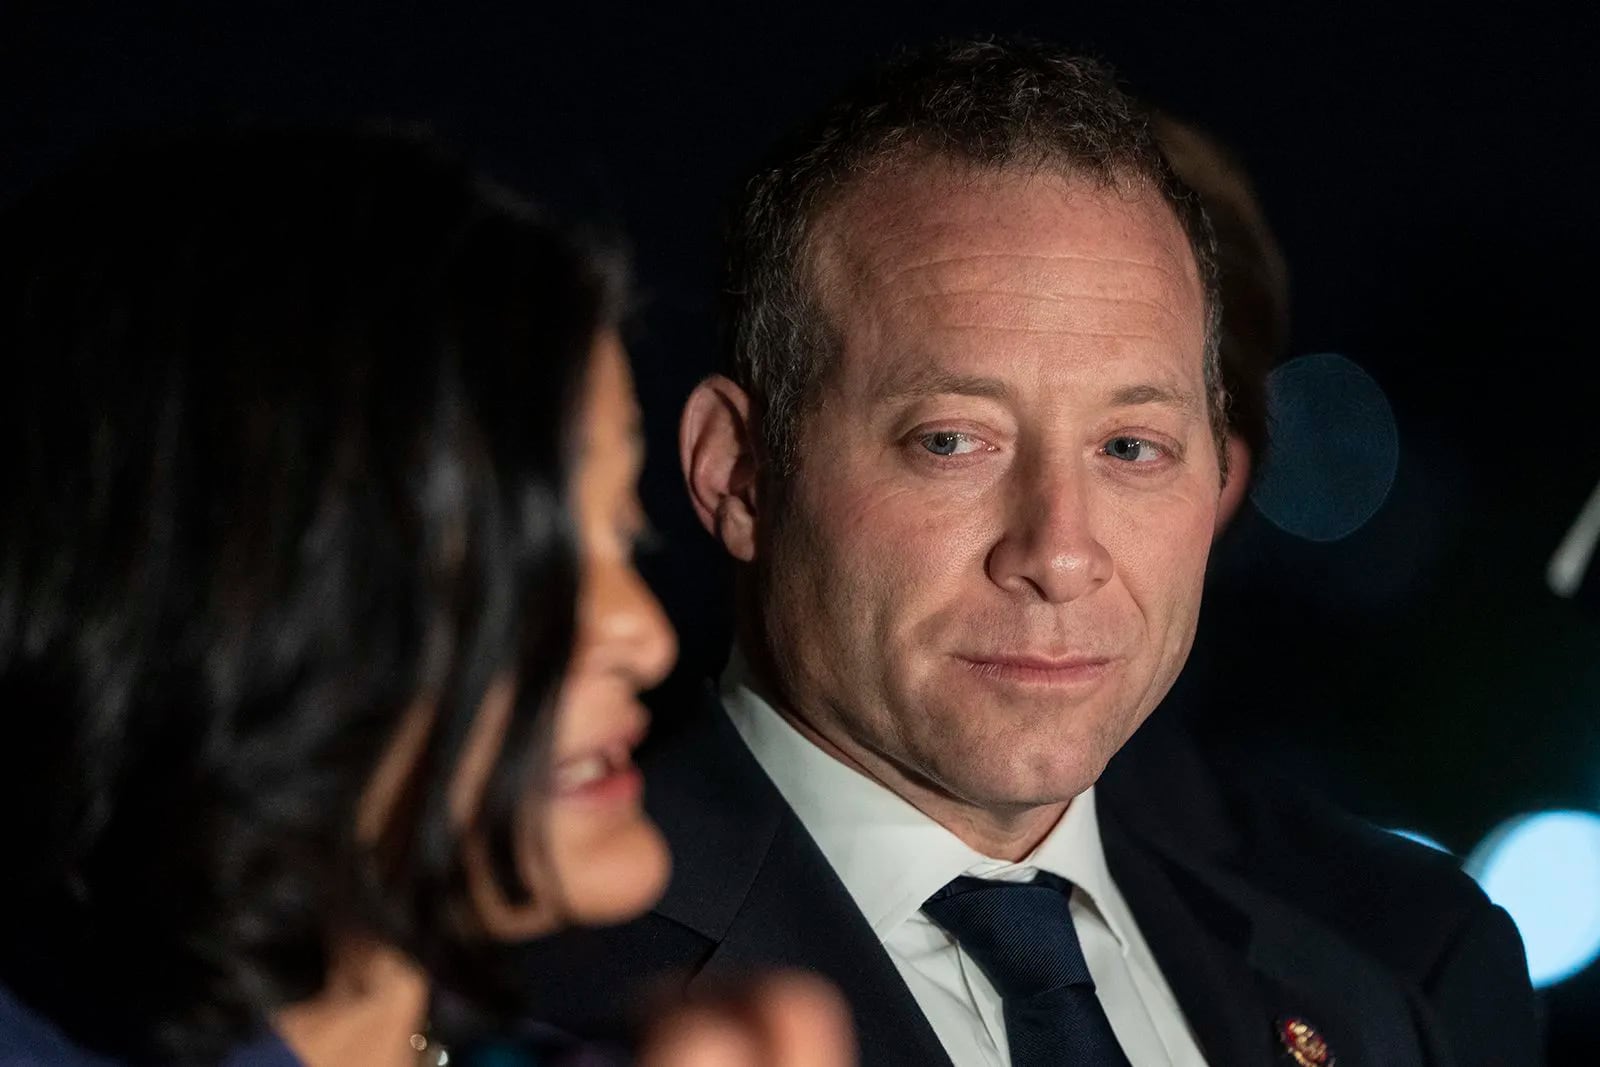 From left to right: Rep. Pramila Jayapal (D., Wa.) and Rep. Josh Gottheimer (D., N.J.) speak to reporters outside the U.S. Capitol to announce a deal between progressive House Democrats and moderate House Democrats on Nov. 5.